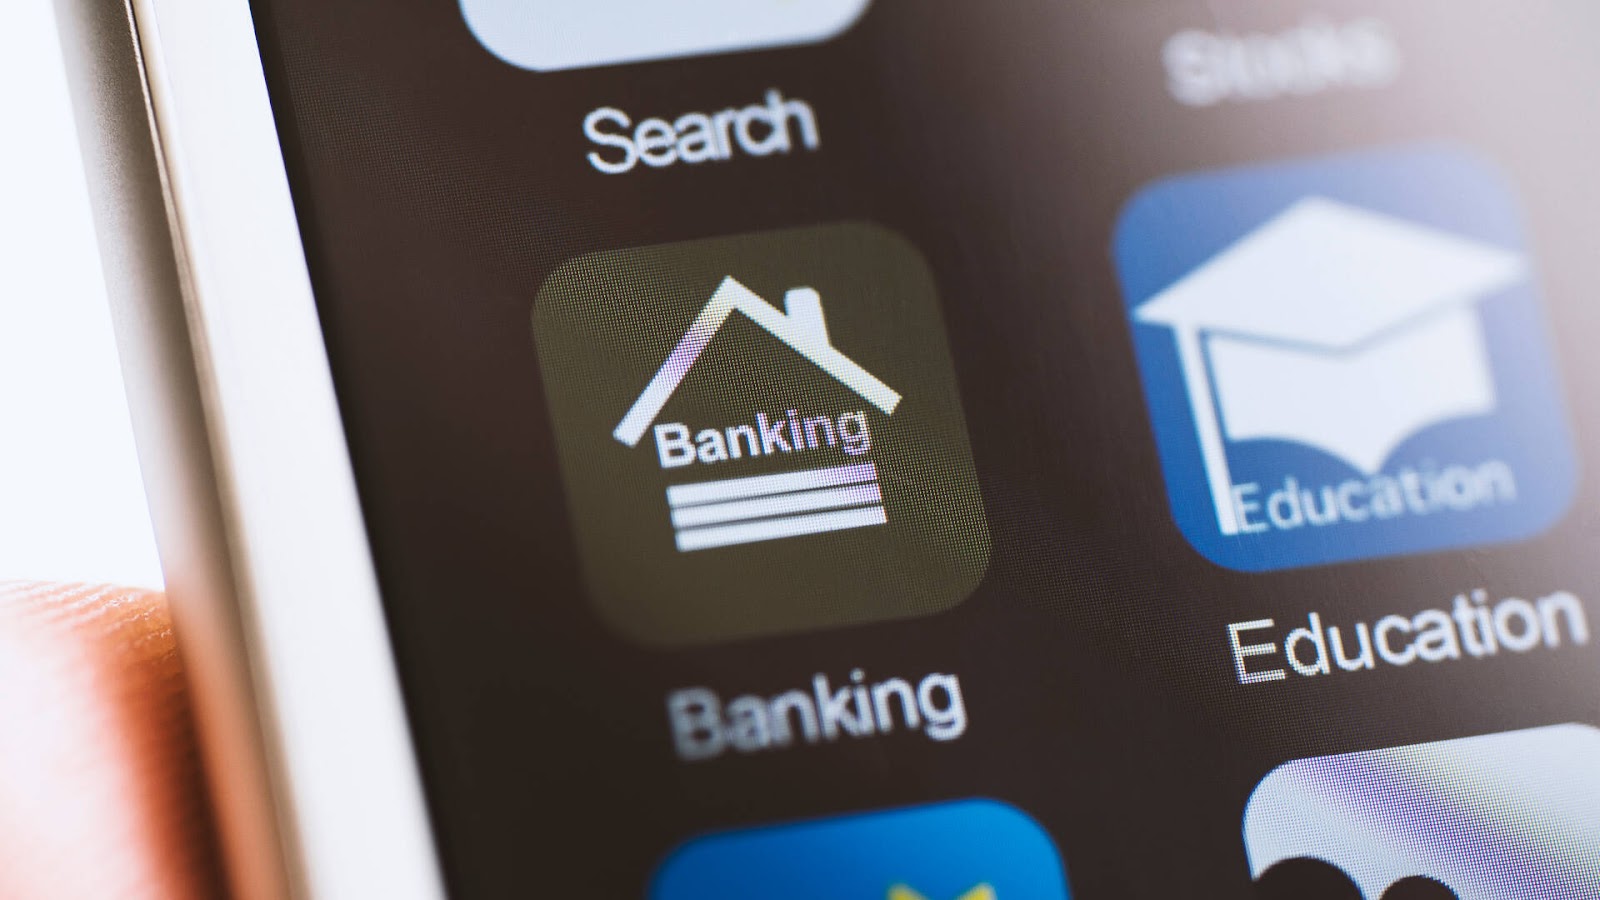 STEPS TO OPTIMIZE DIGITAL ENGAGEMENT IN BANKING